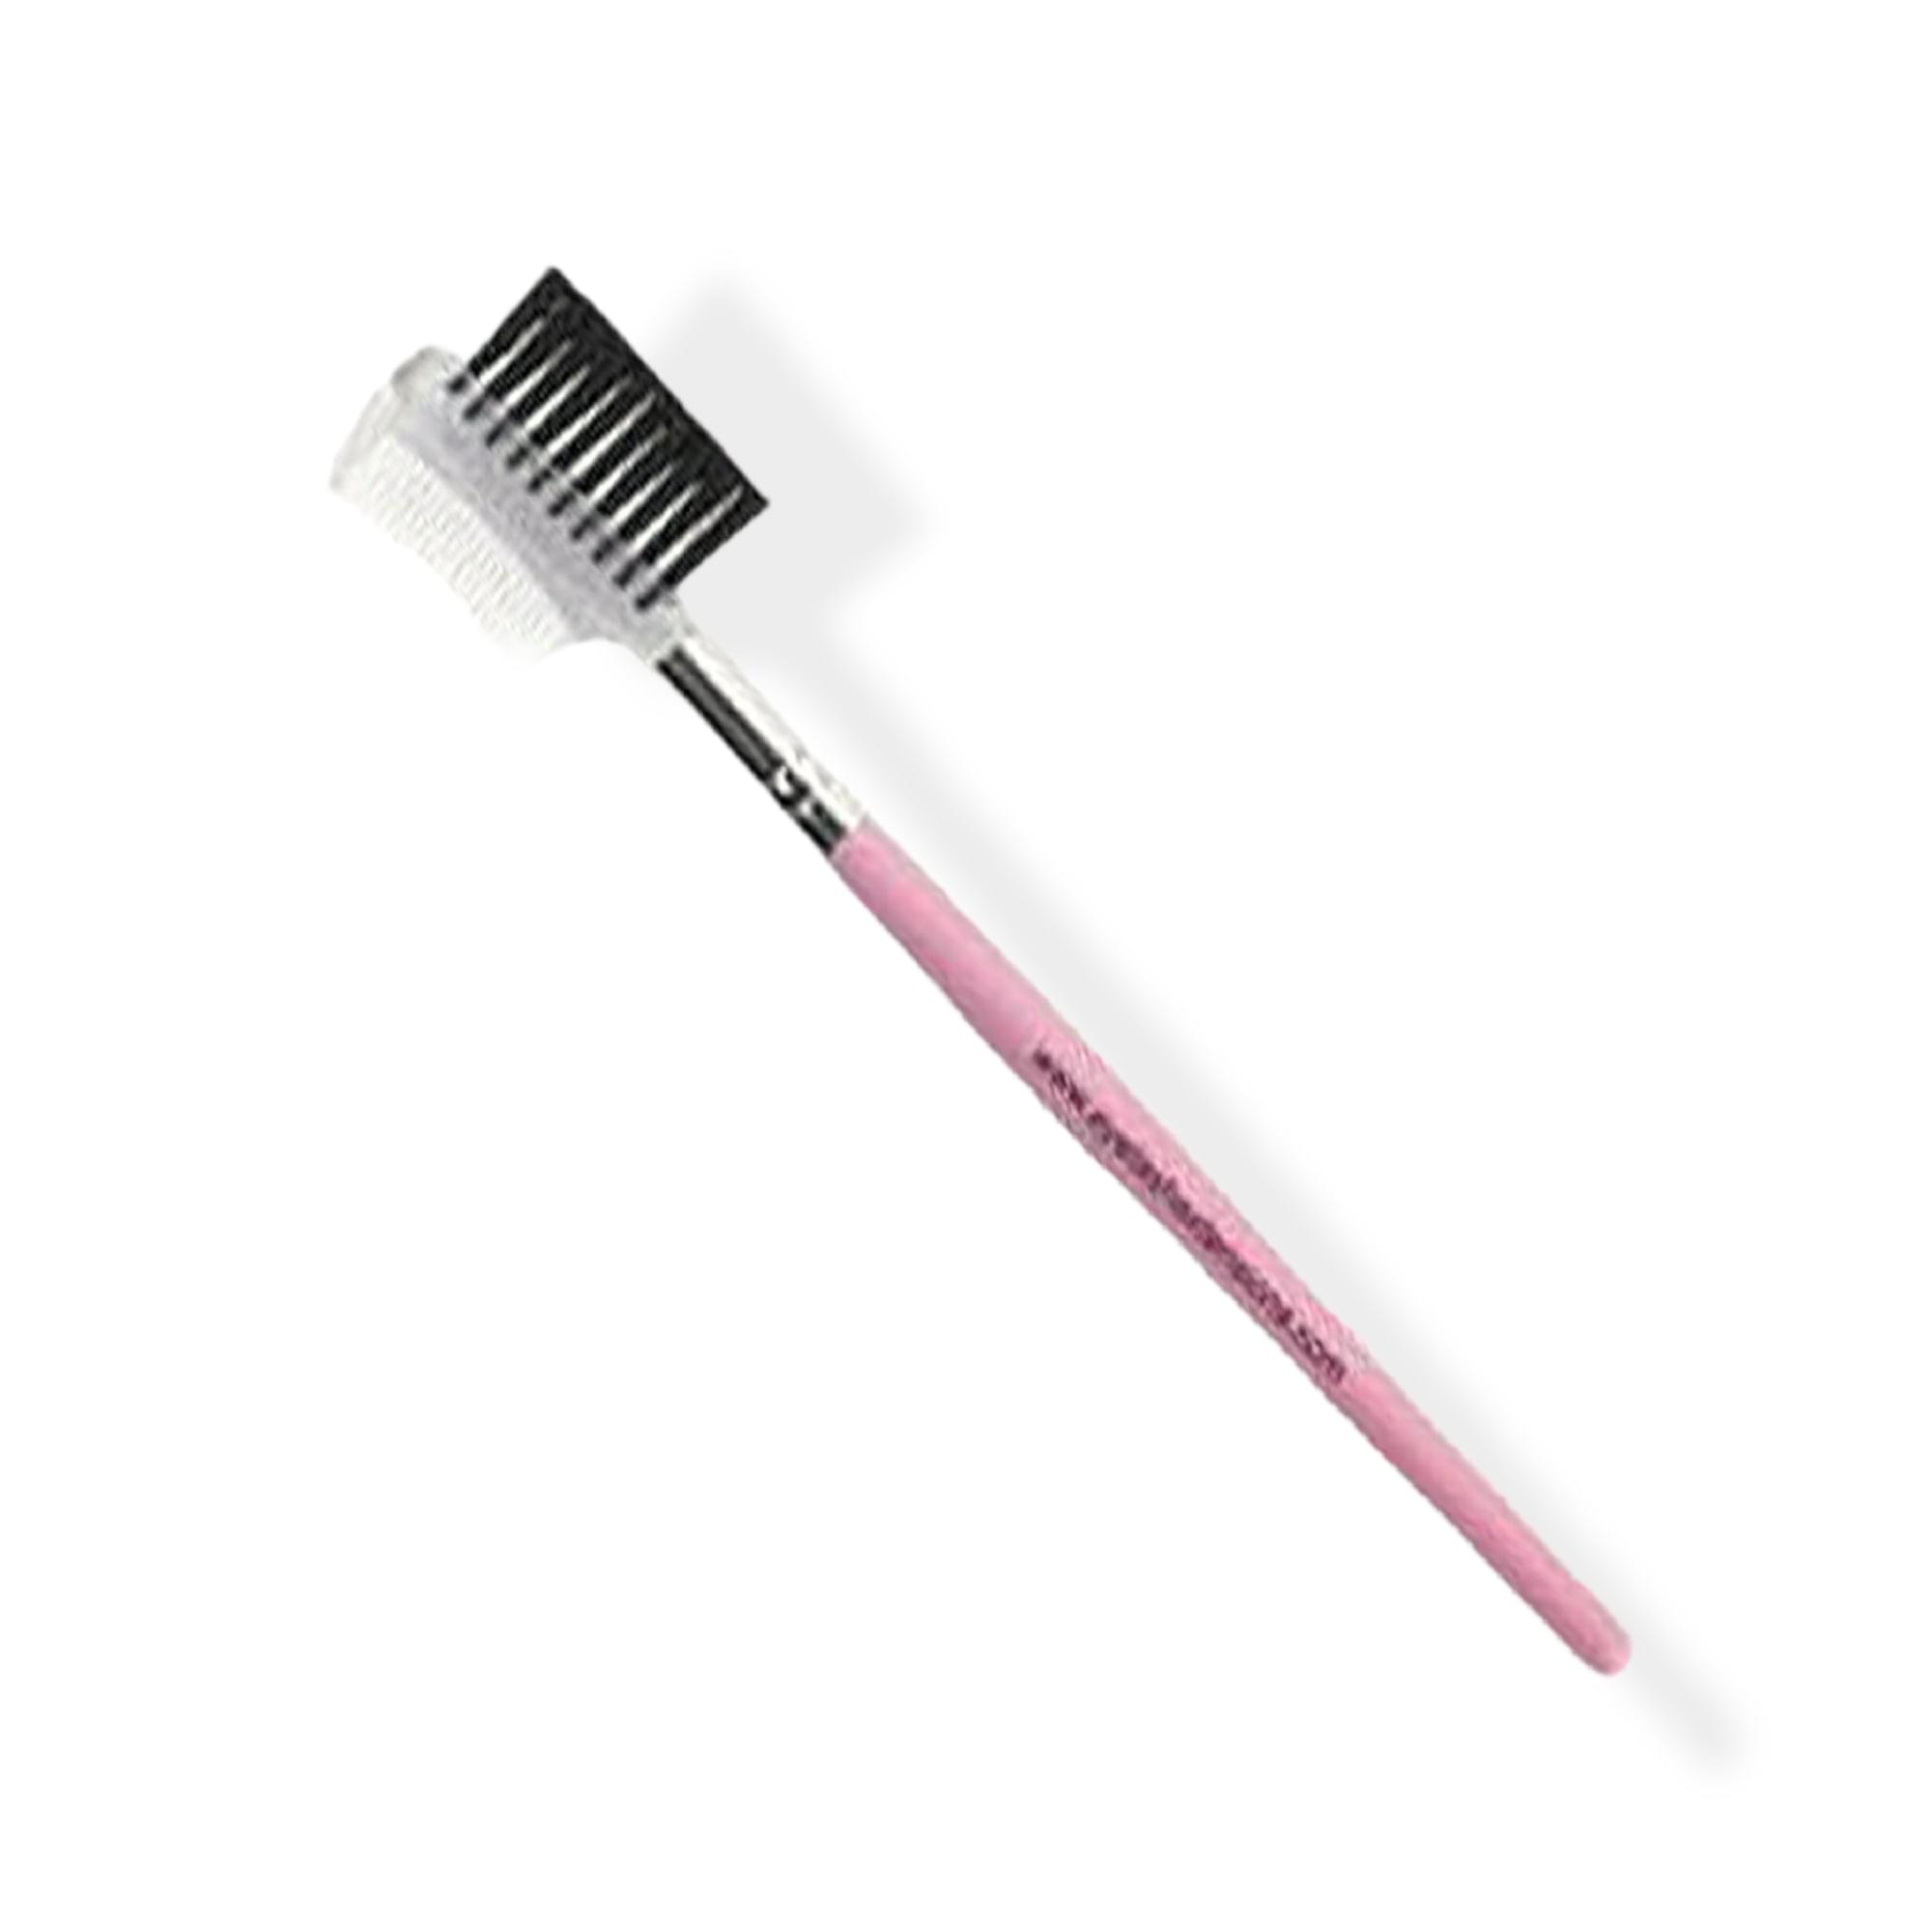 All-in-one Lash Comb & Brow Brush